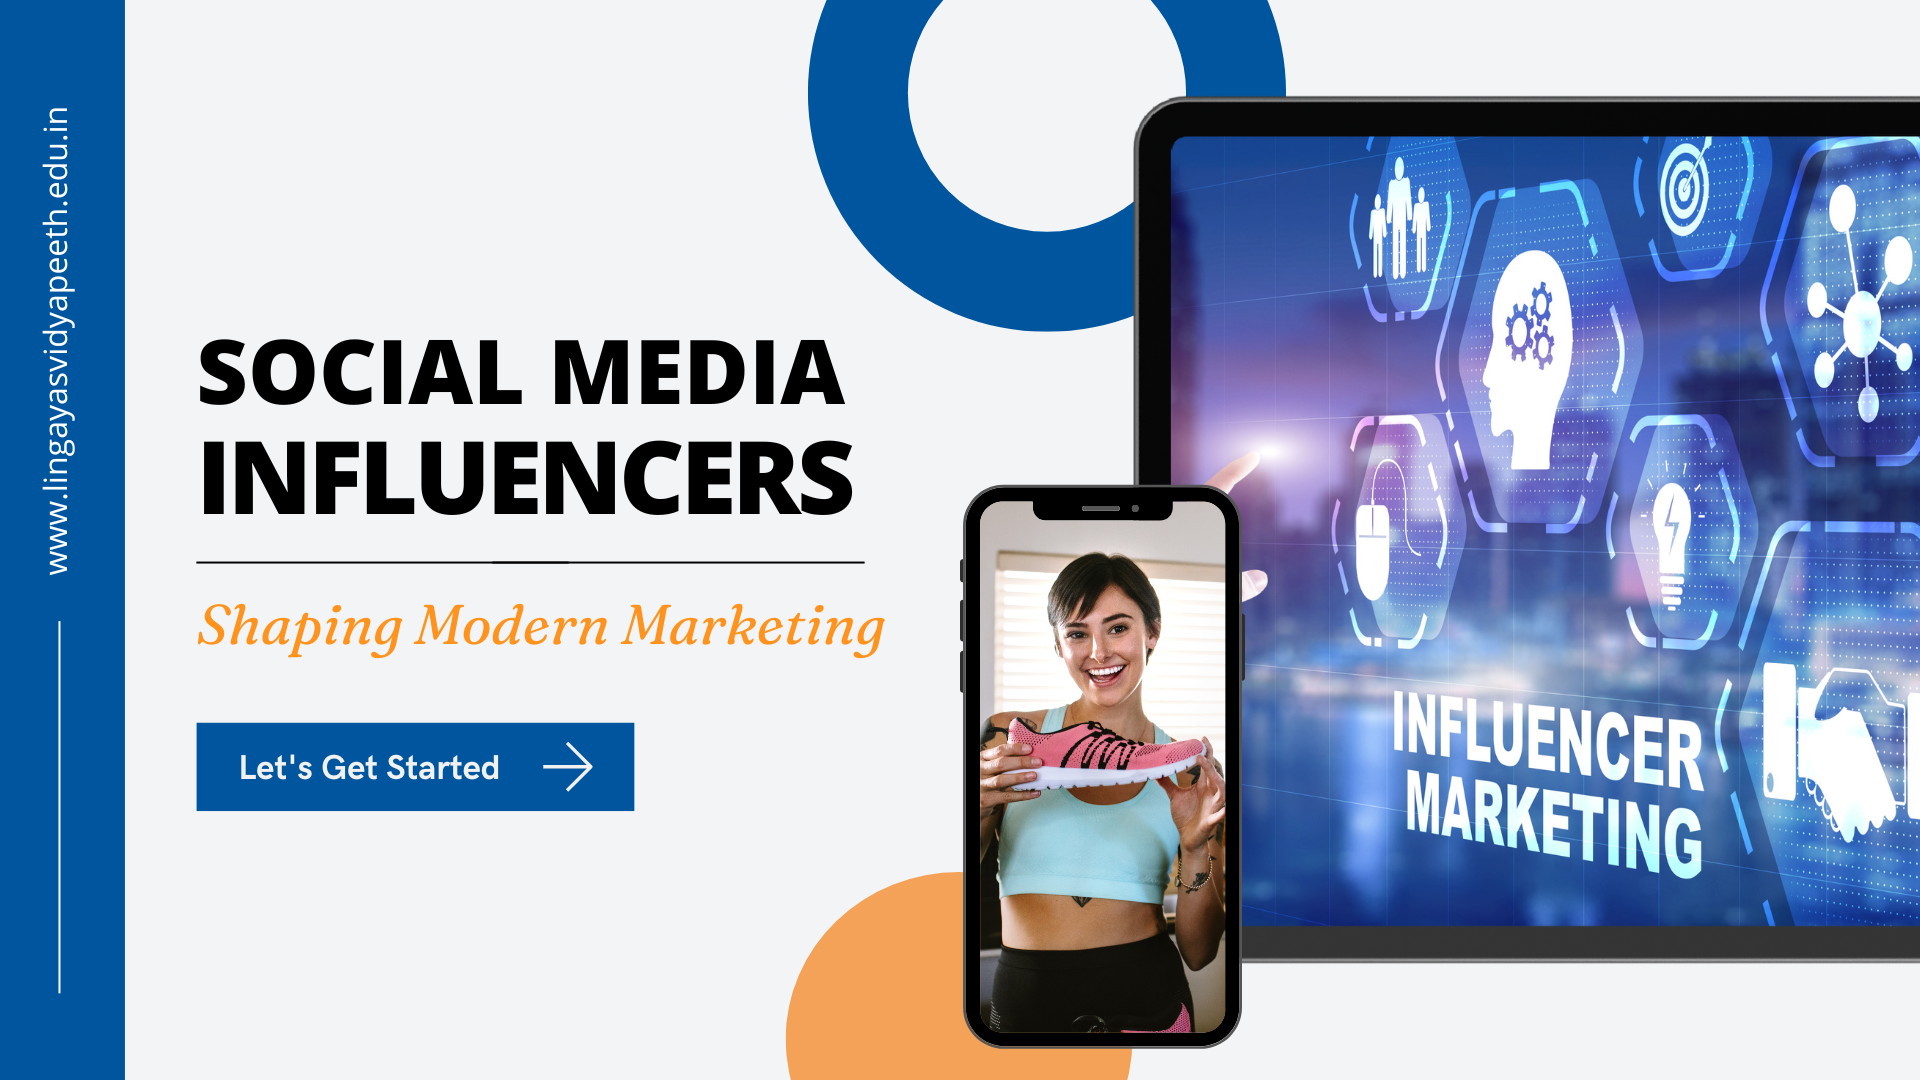 How Social Media Influencers Are Shaping Modern Marketing?